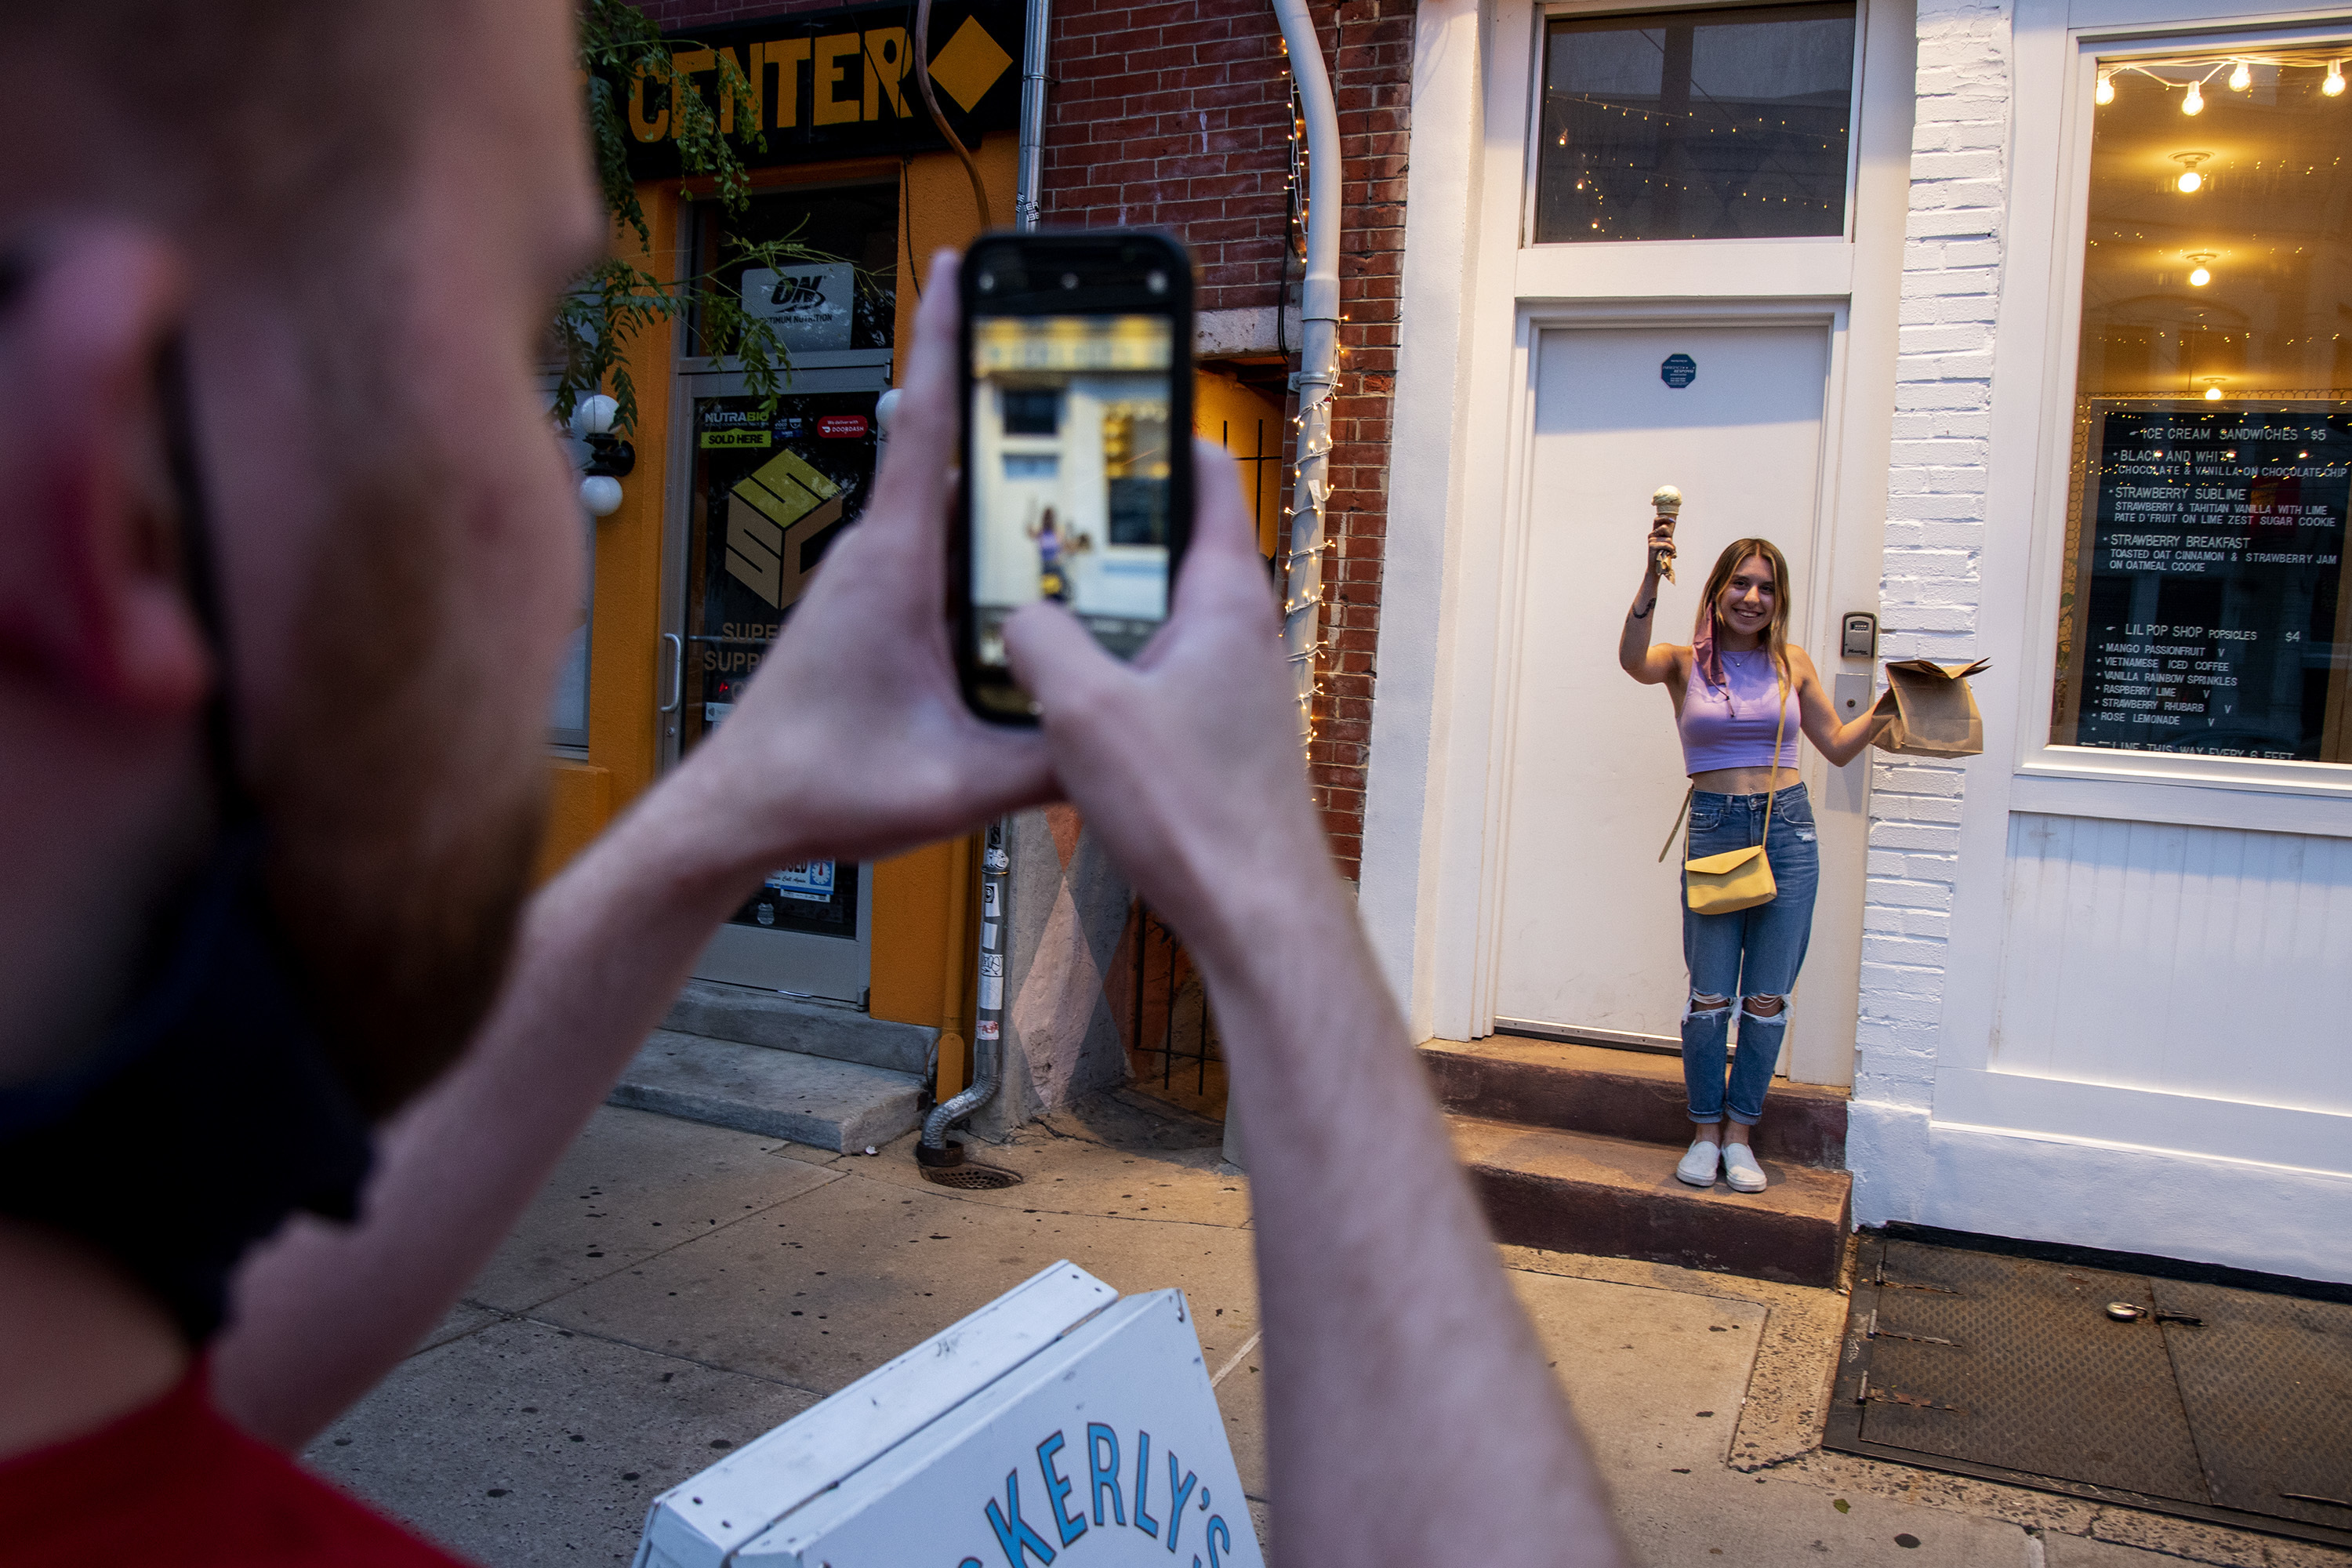 Craig Rounsaville takes a photo of Courtney Arce with her cone at Weckerly's Ice Cream in Fishtown.